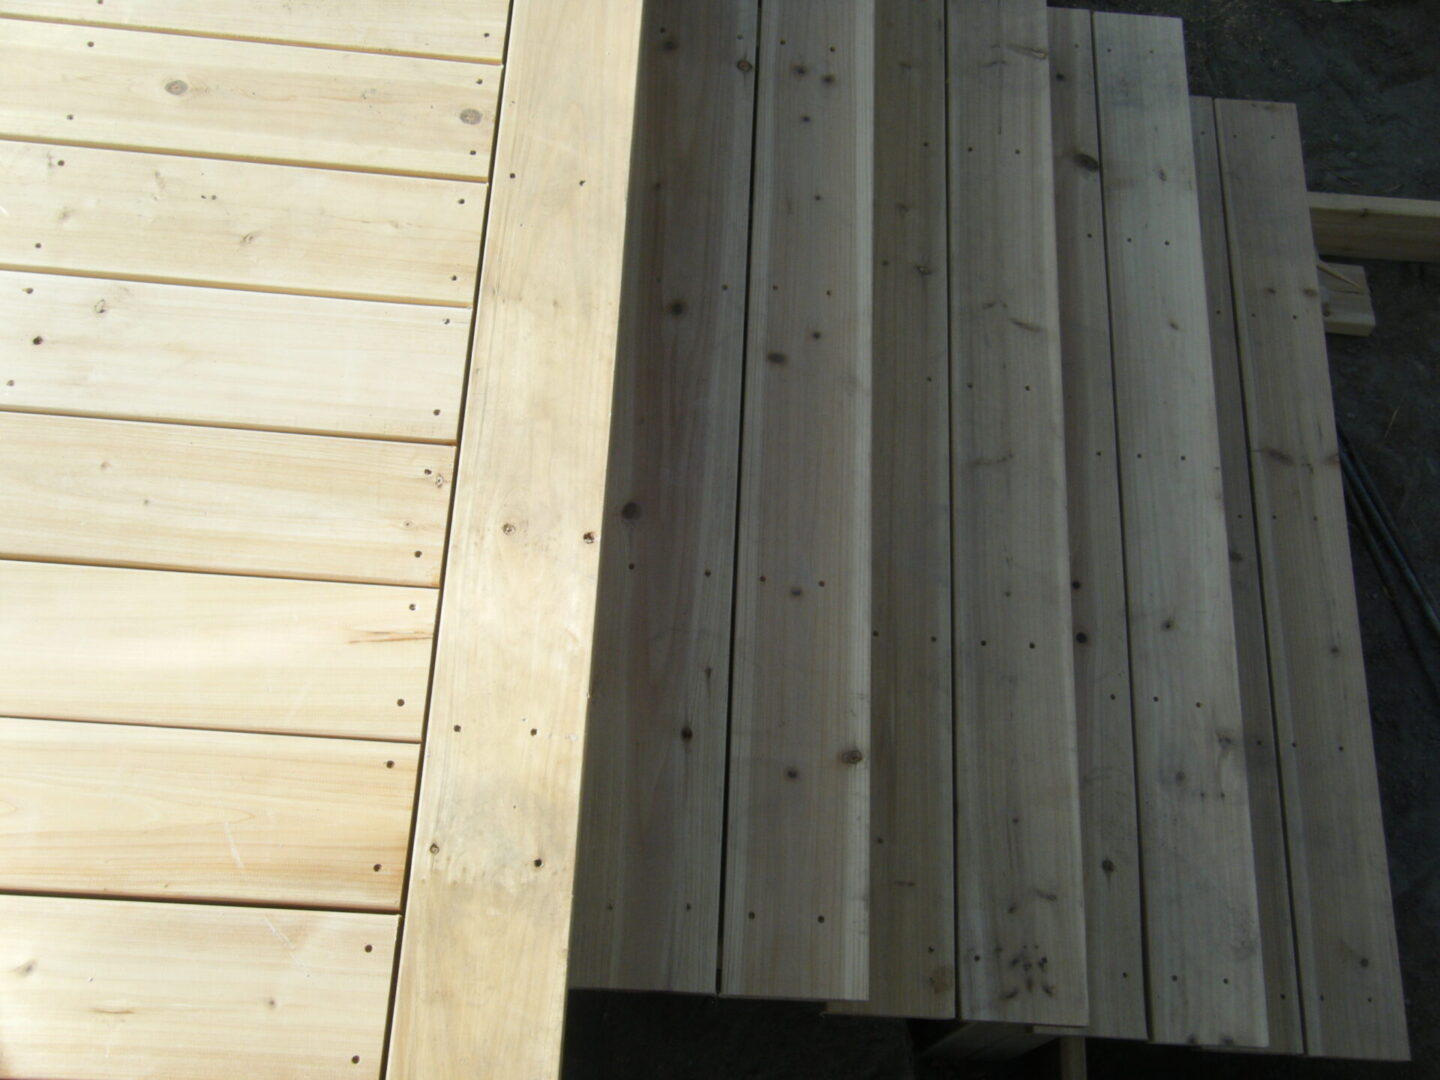 Closer view of a wooden deck with stairs